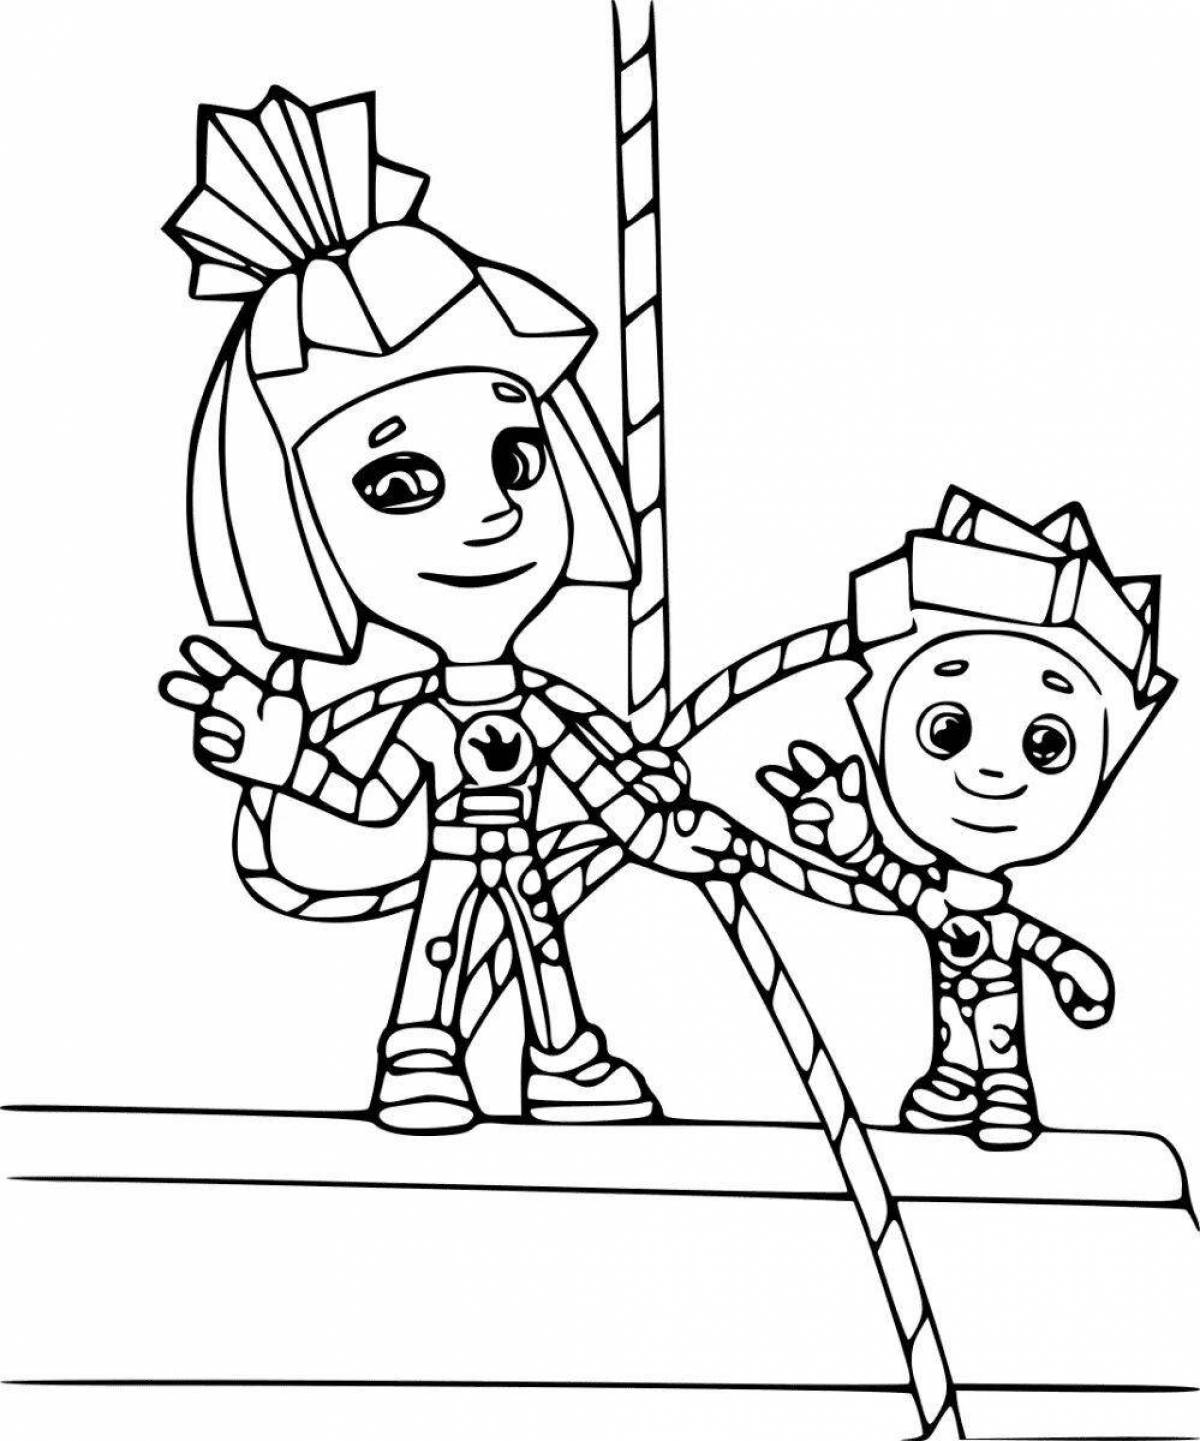 Fun fixies coloring pages for kids